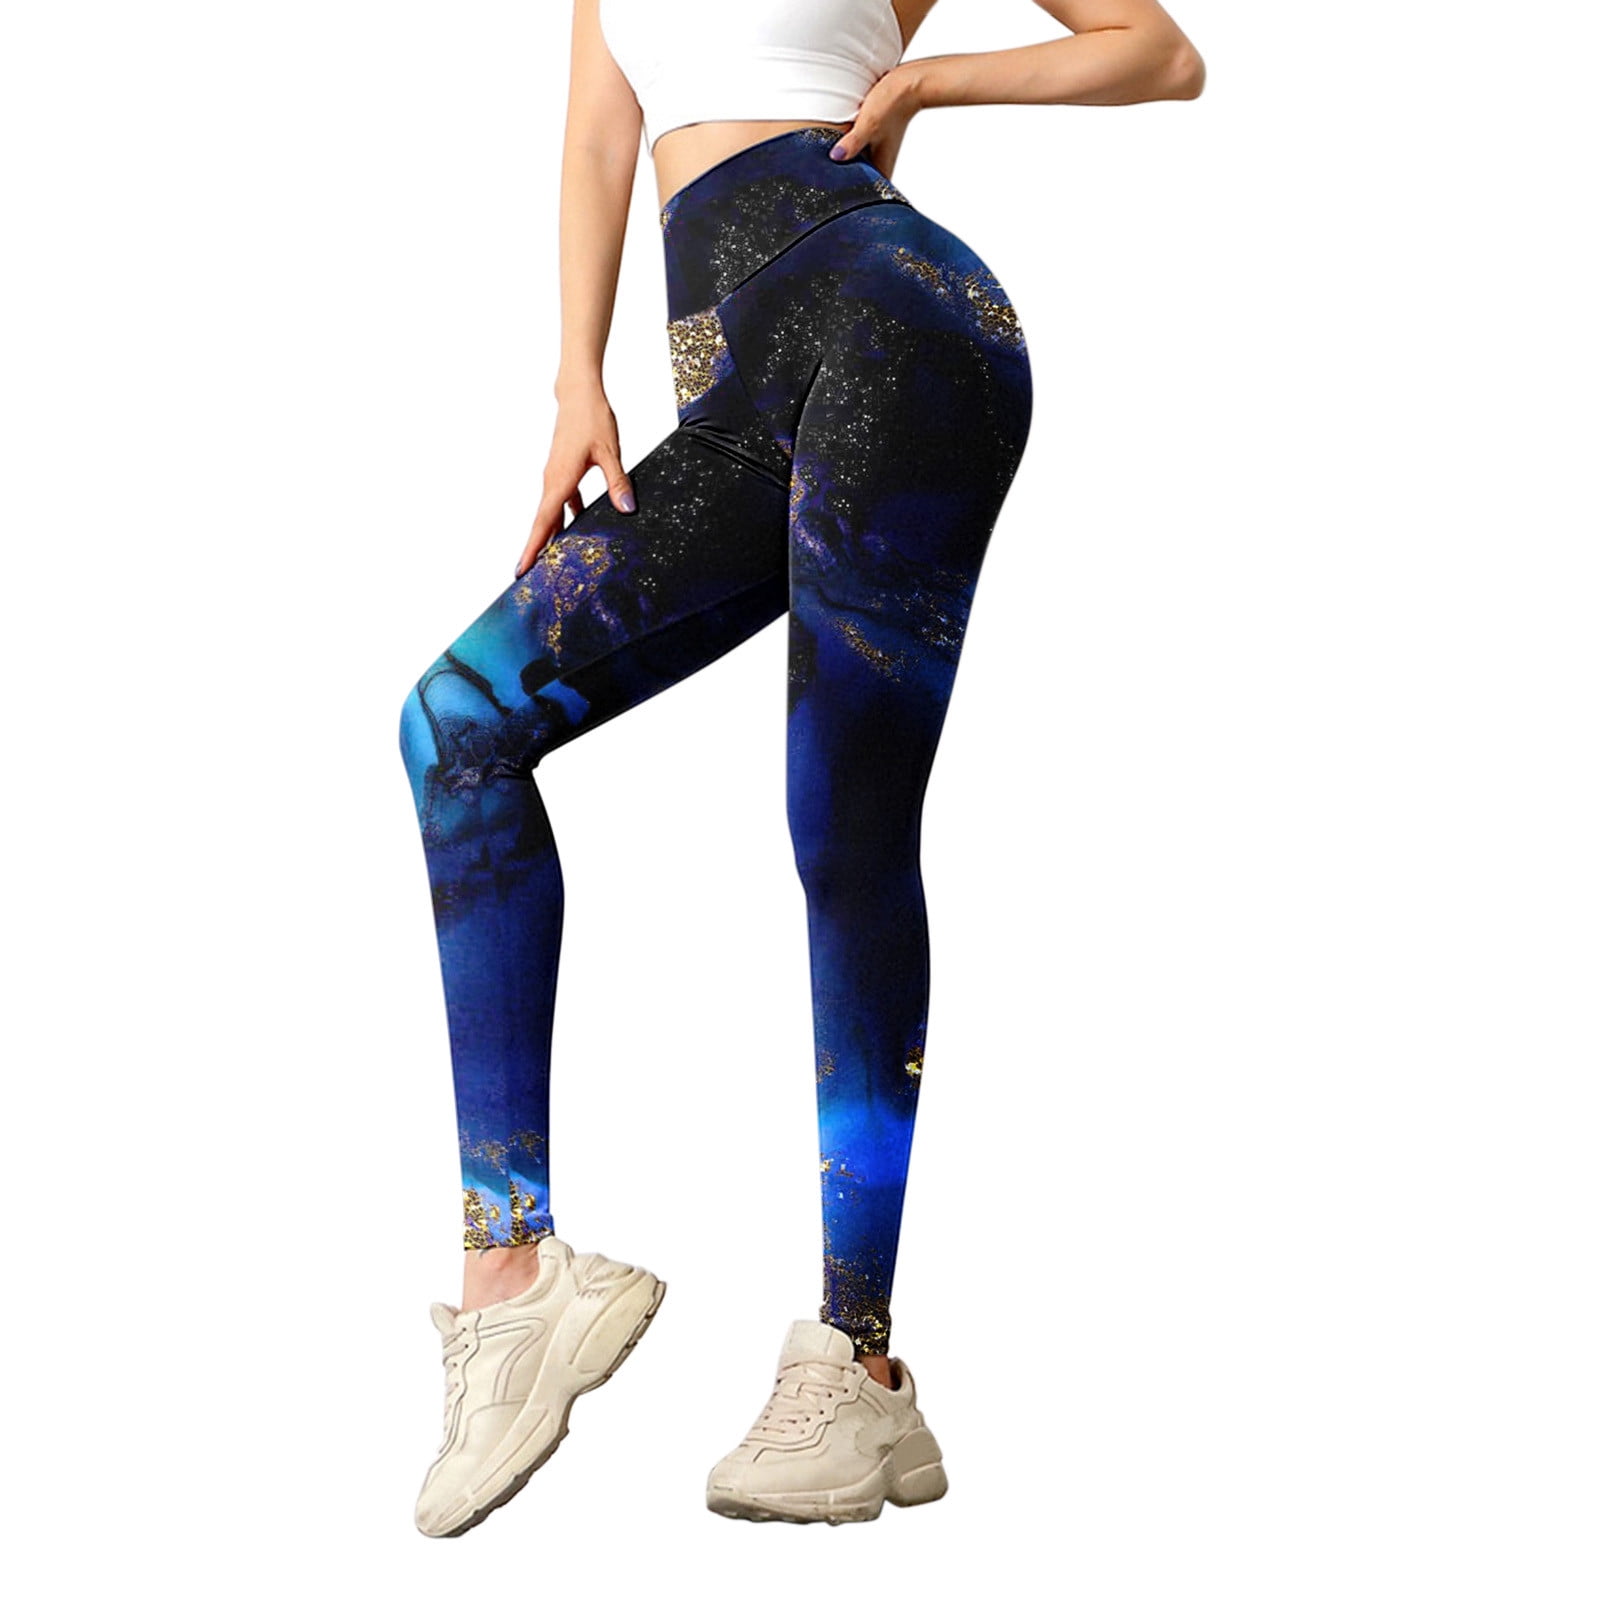 Futuro Fashion Women High Waisted Leggings, Bamboo Fiber Buttery Soft Tummy  Control Ladies Casual Gym, Running, Workout Leggings Stretchy Yoga Pants